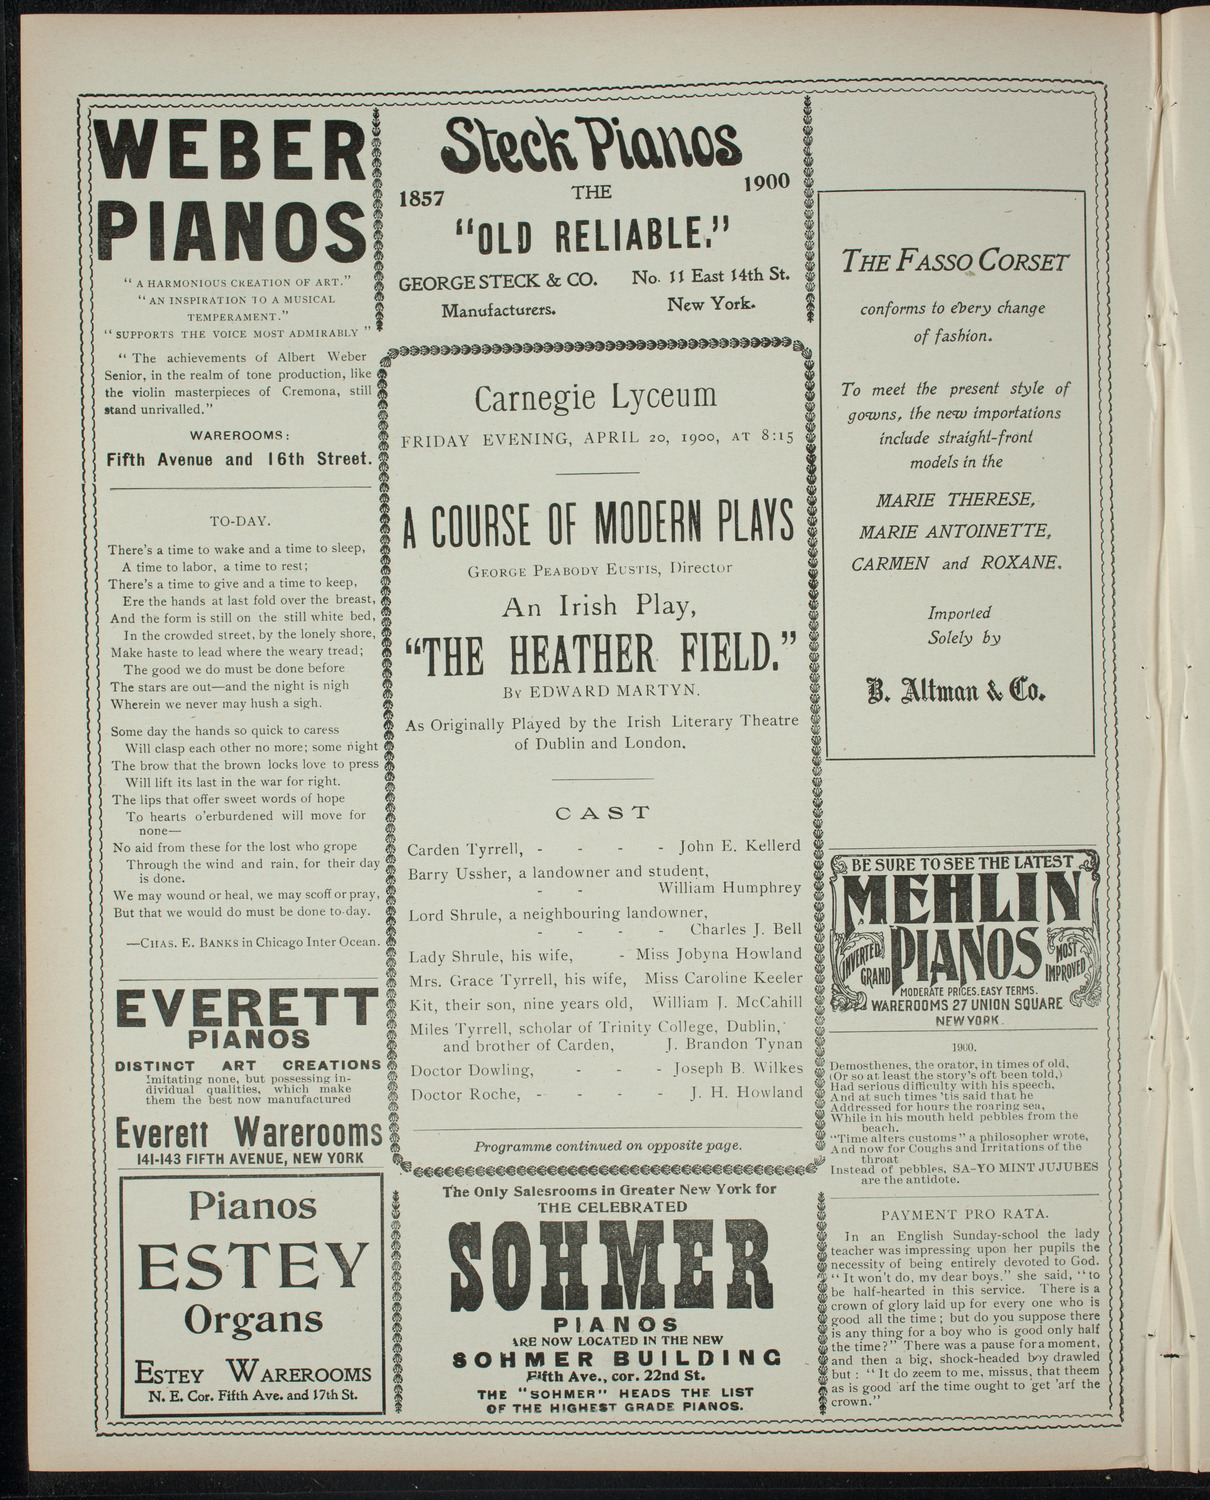 George Peabody Eustis: A Course of Modern Plays, April 20, 1900, program page 2